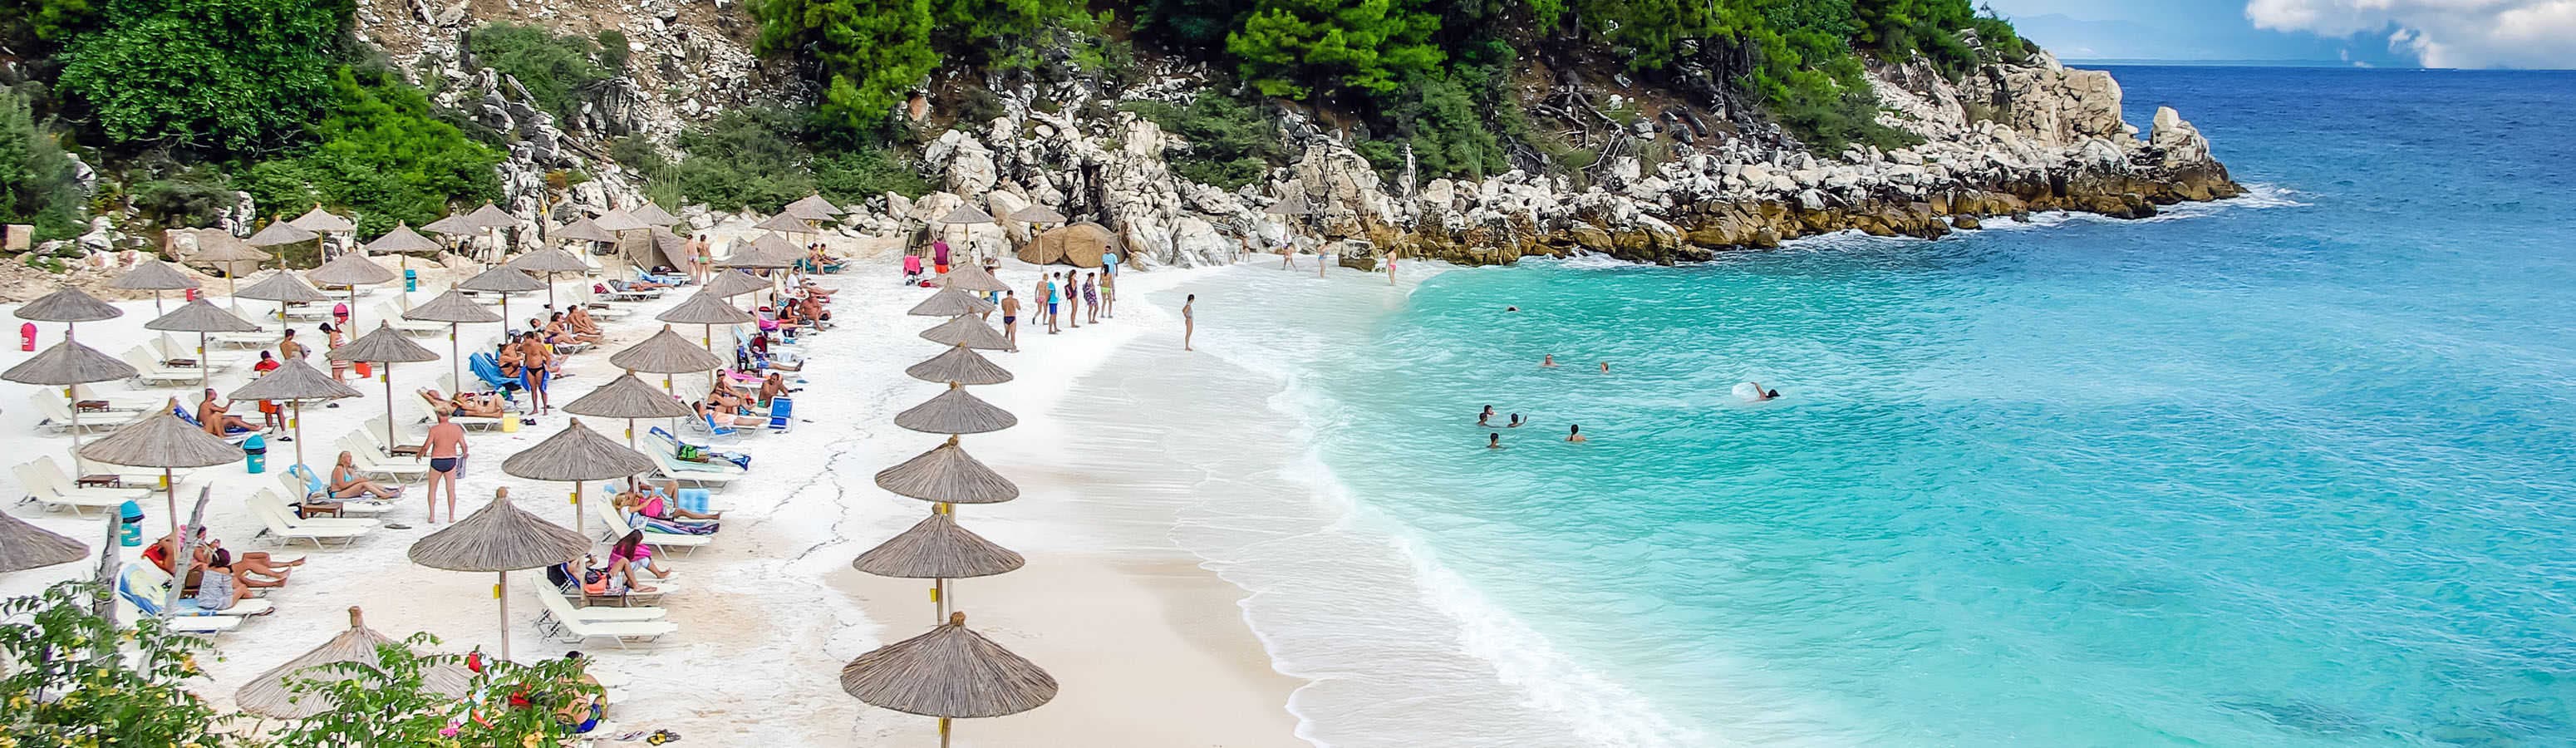 10 most beautiful beaches in Greece